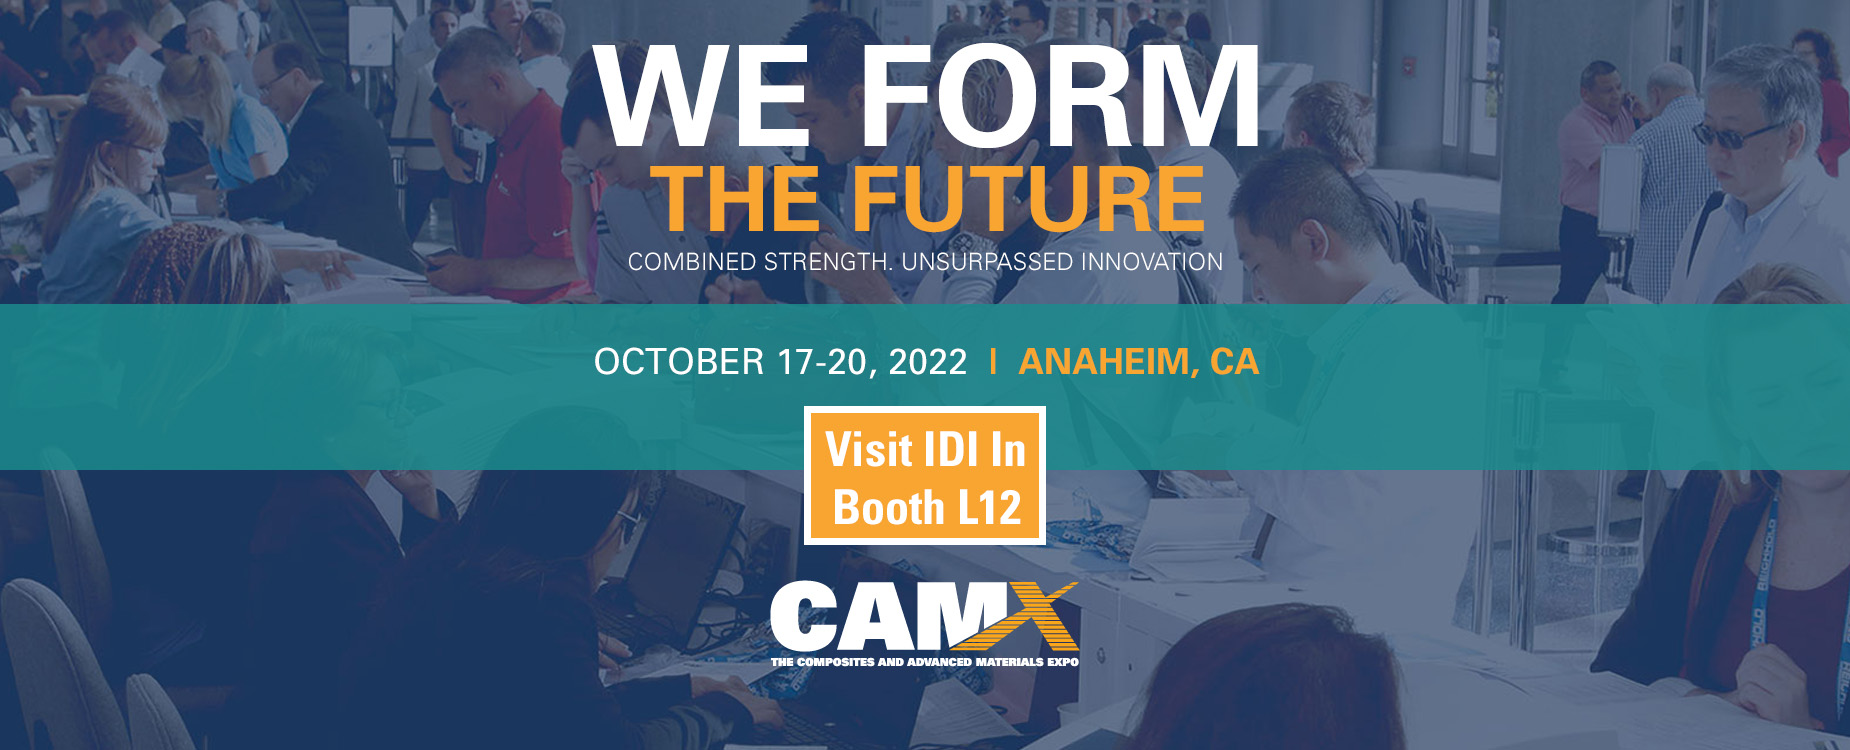 Visit IDI at the 2022 CAMX Show